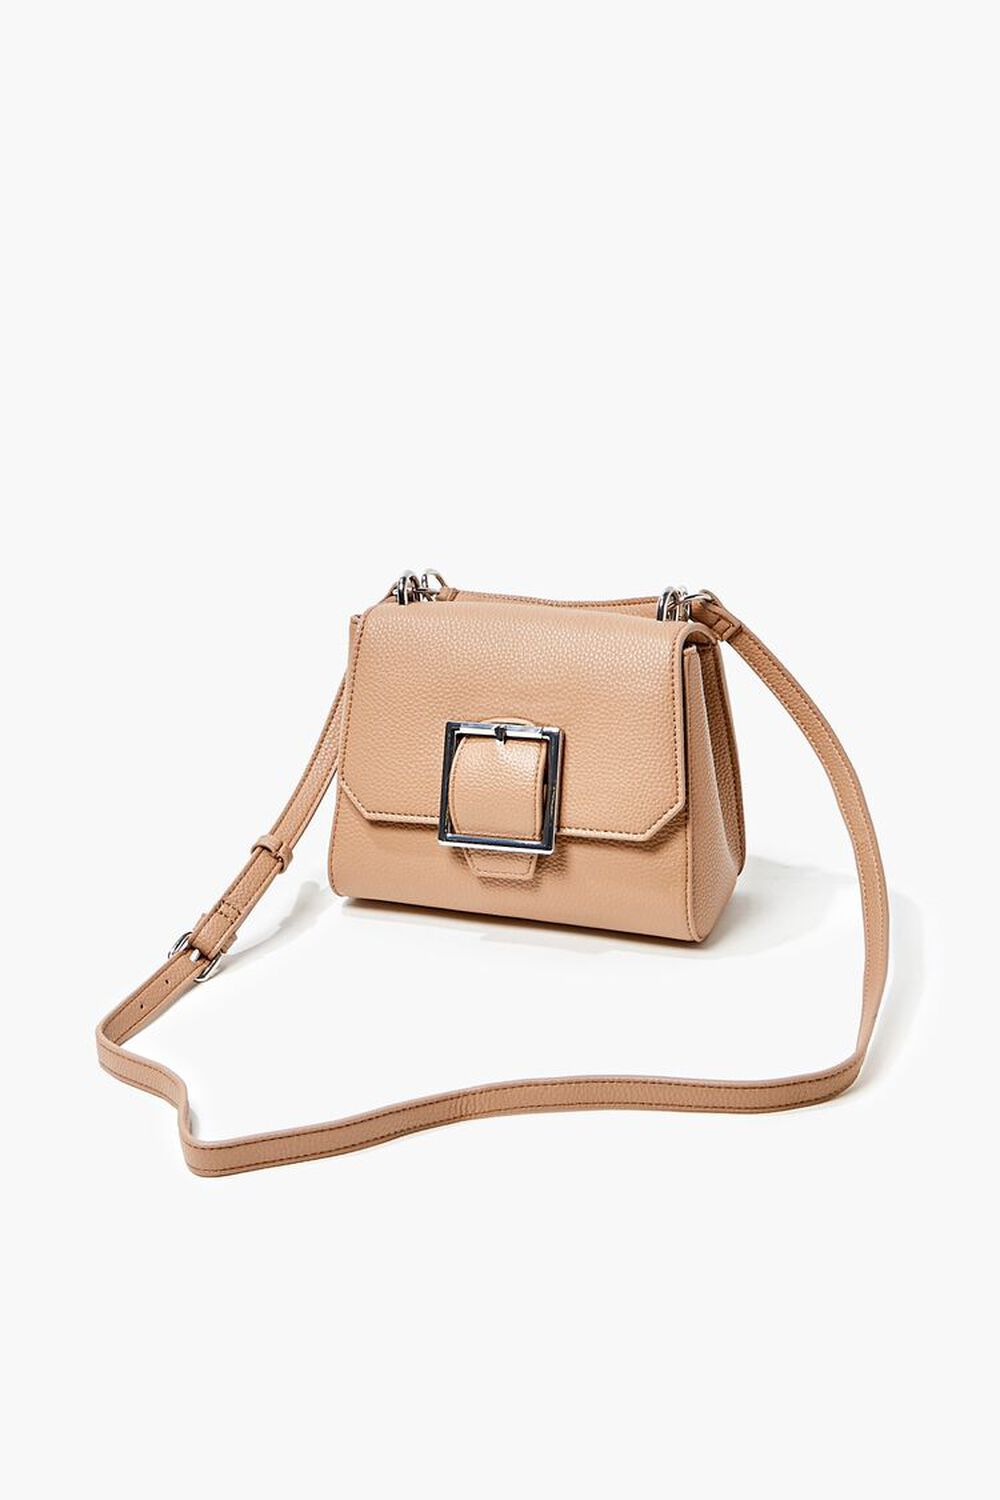 TAUPE Pebbled Faux Leather Crossbody Bag, image 1